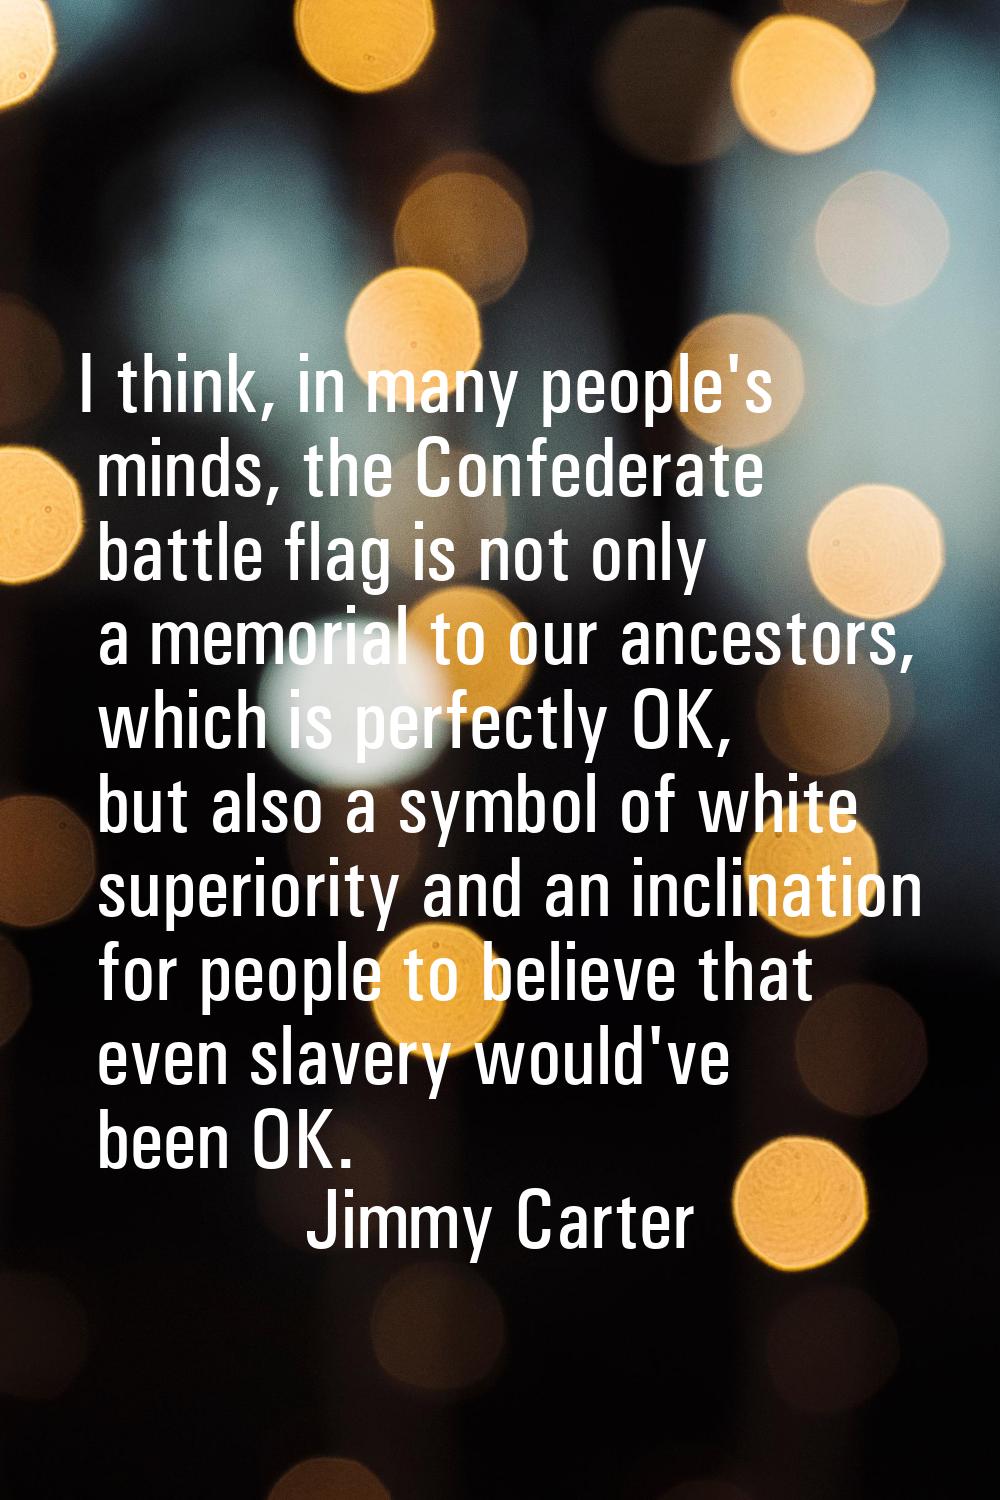 I think, in many people's minds, the Confederate battle flag is not only a memorial to our ancestor